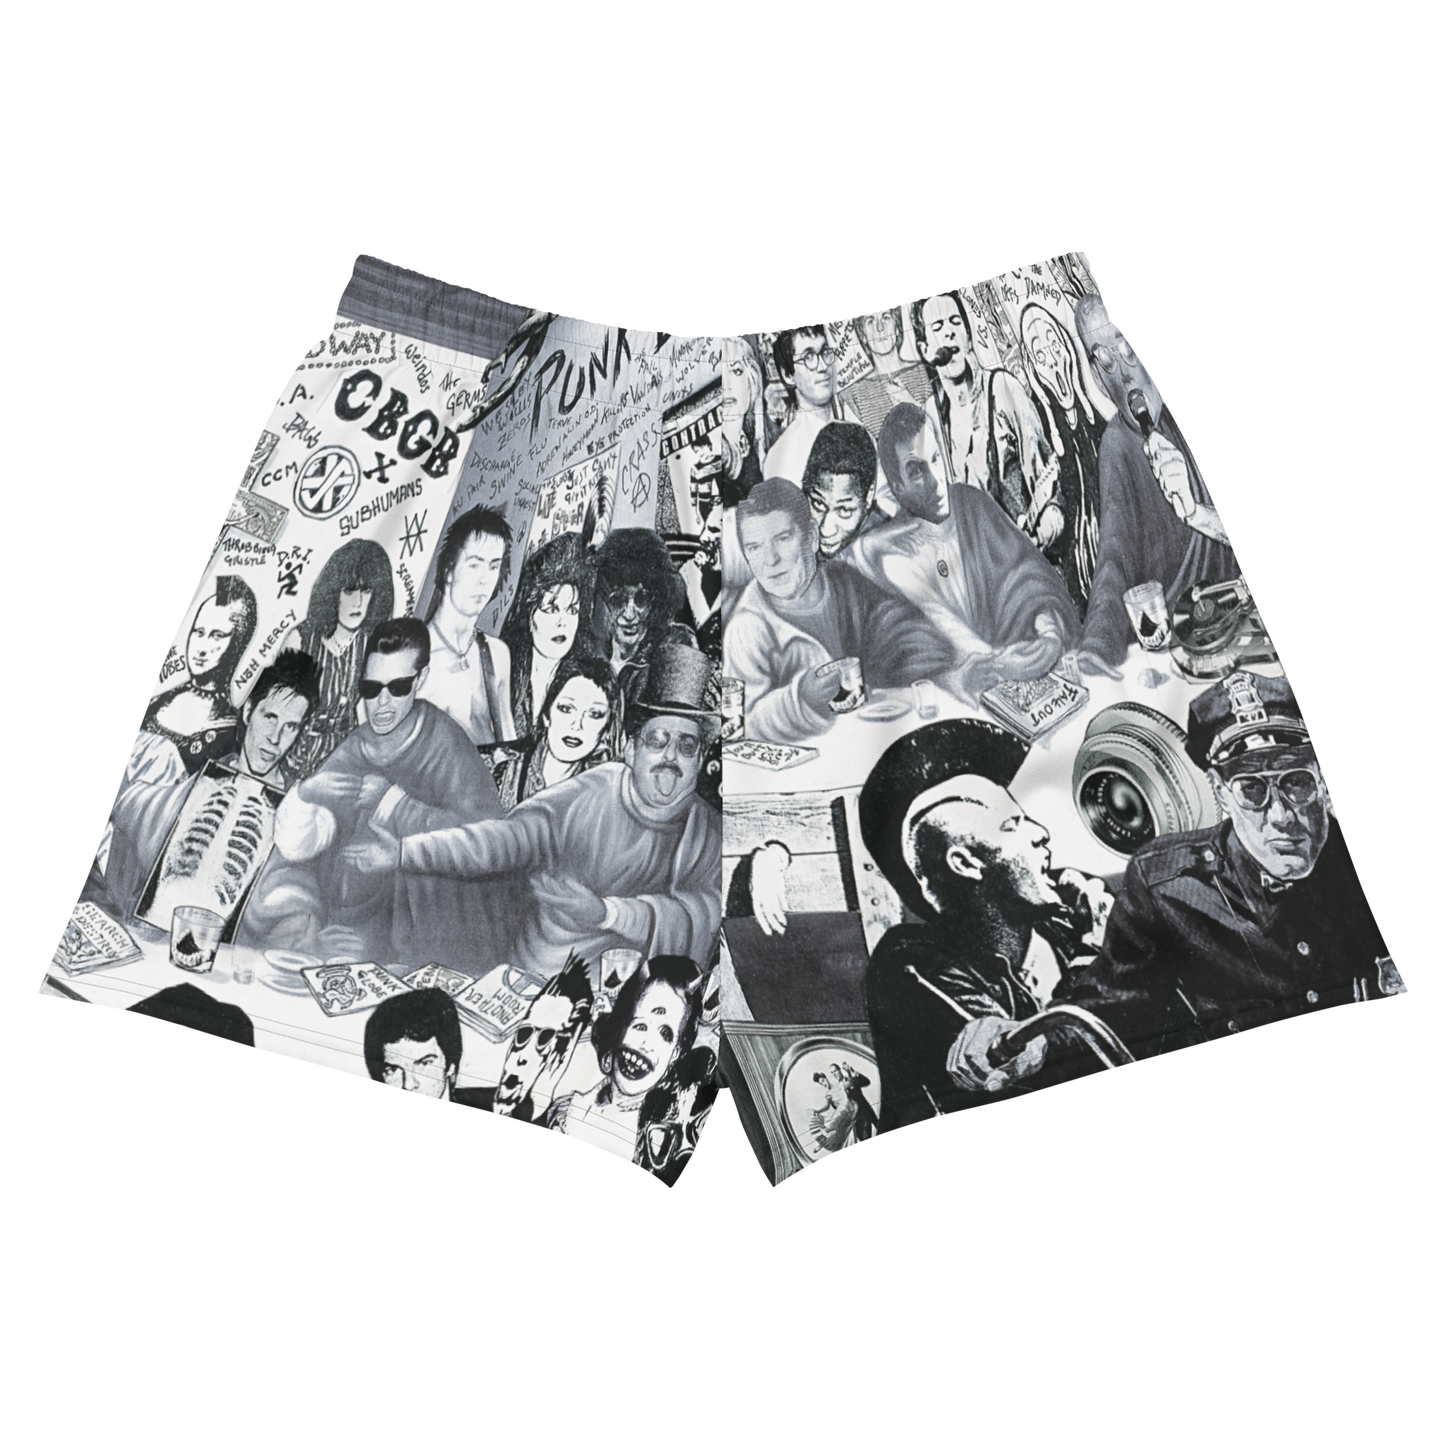 Winston Smith "Never Give Up" Women’s Recycled Athletic Shorts